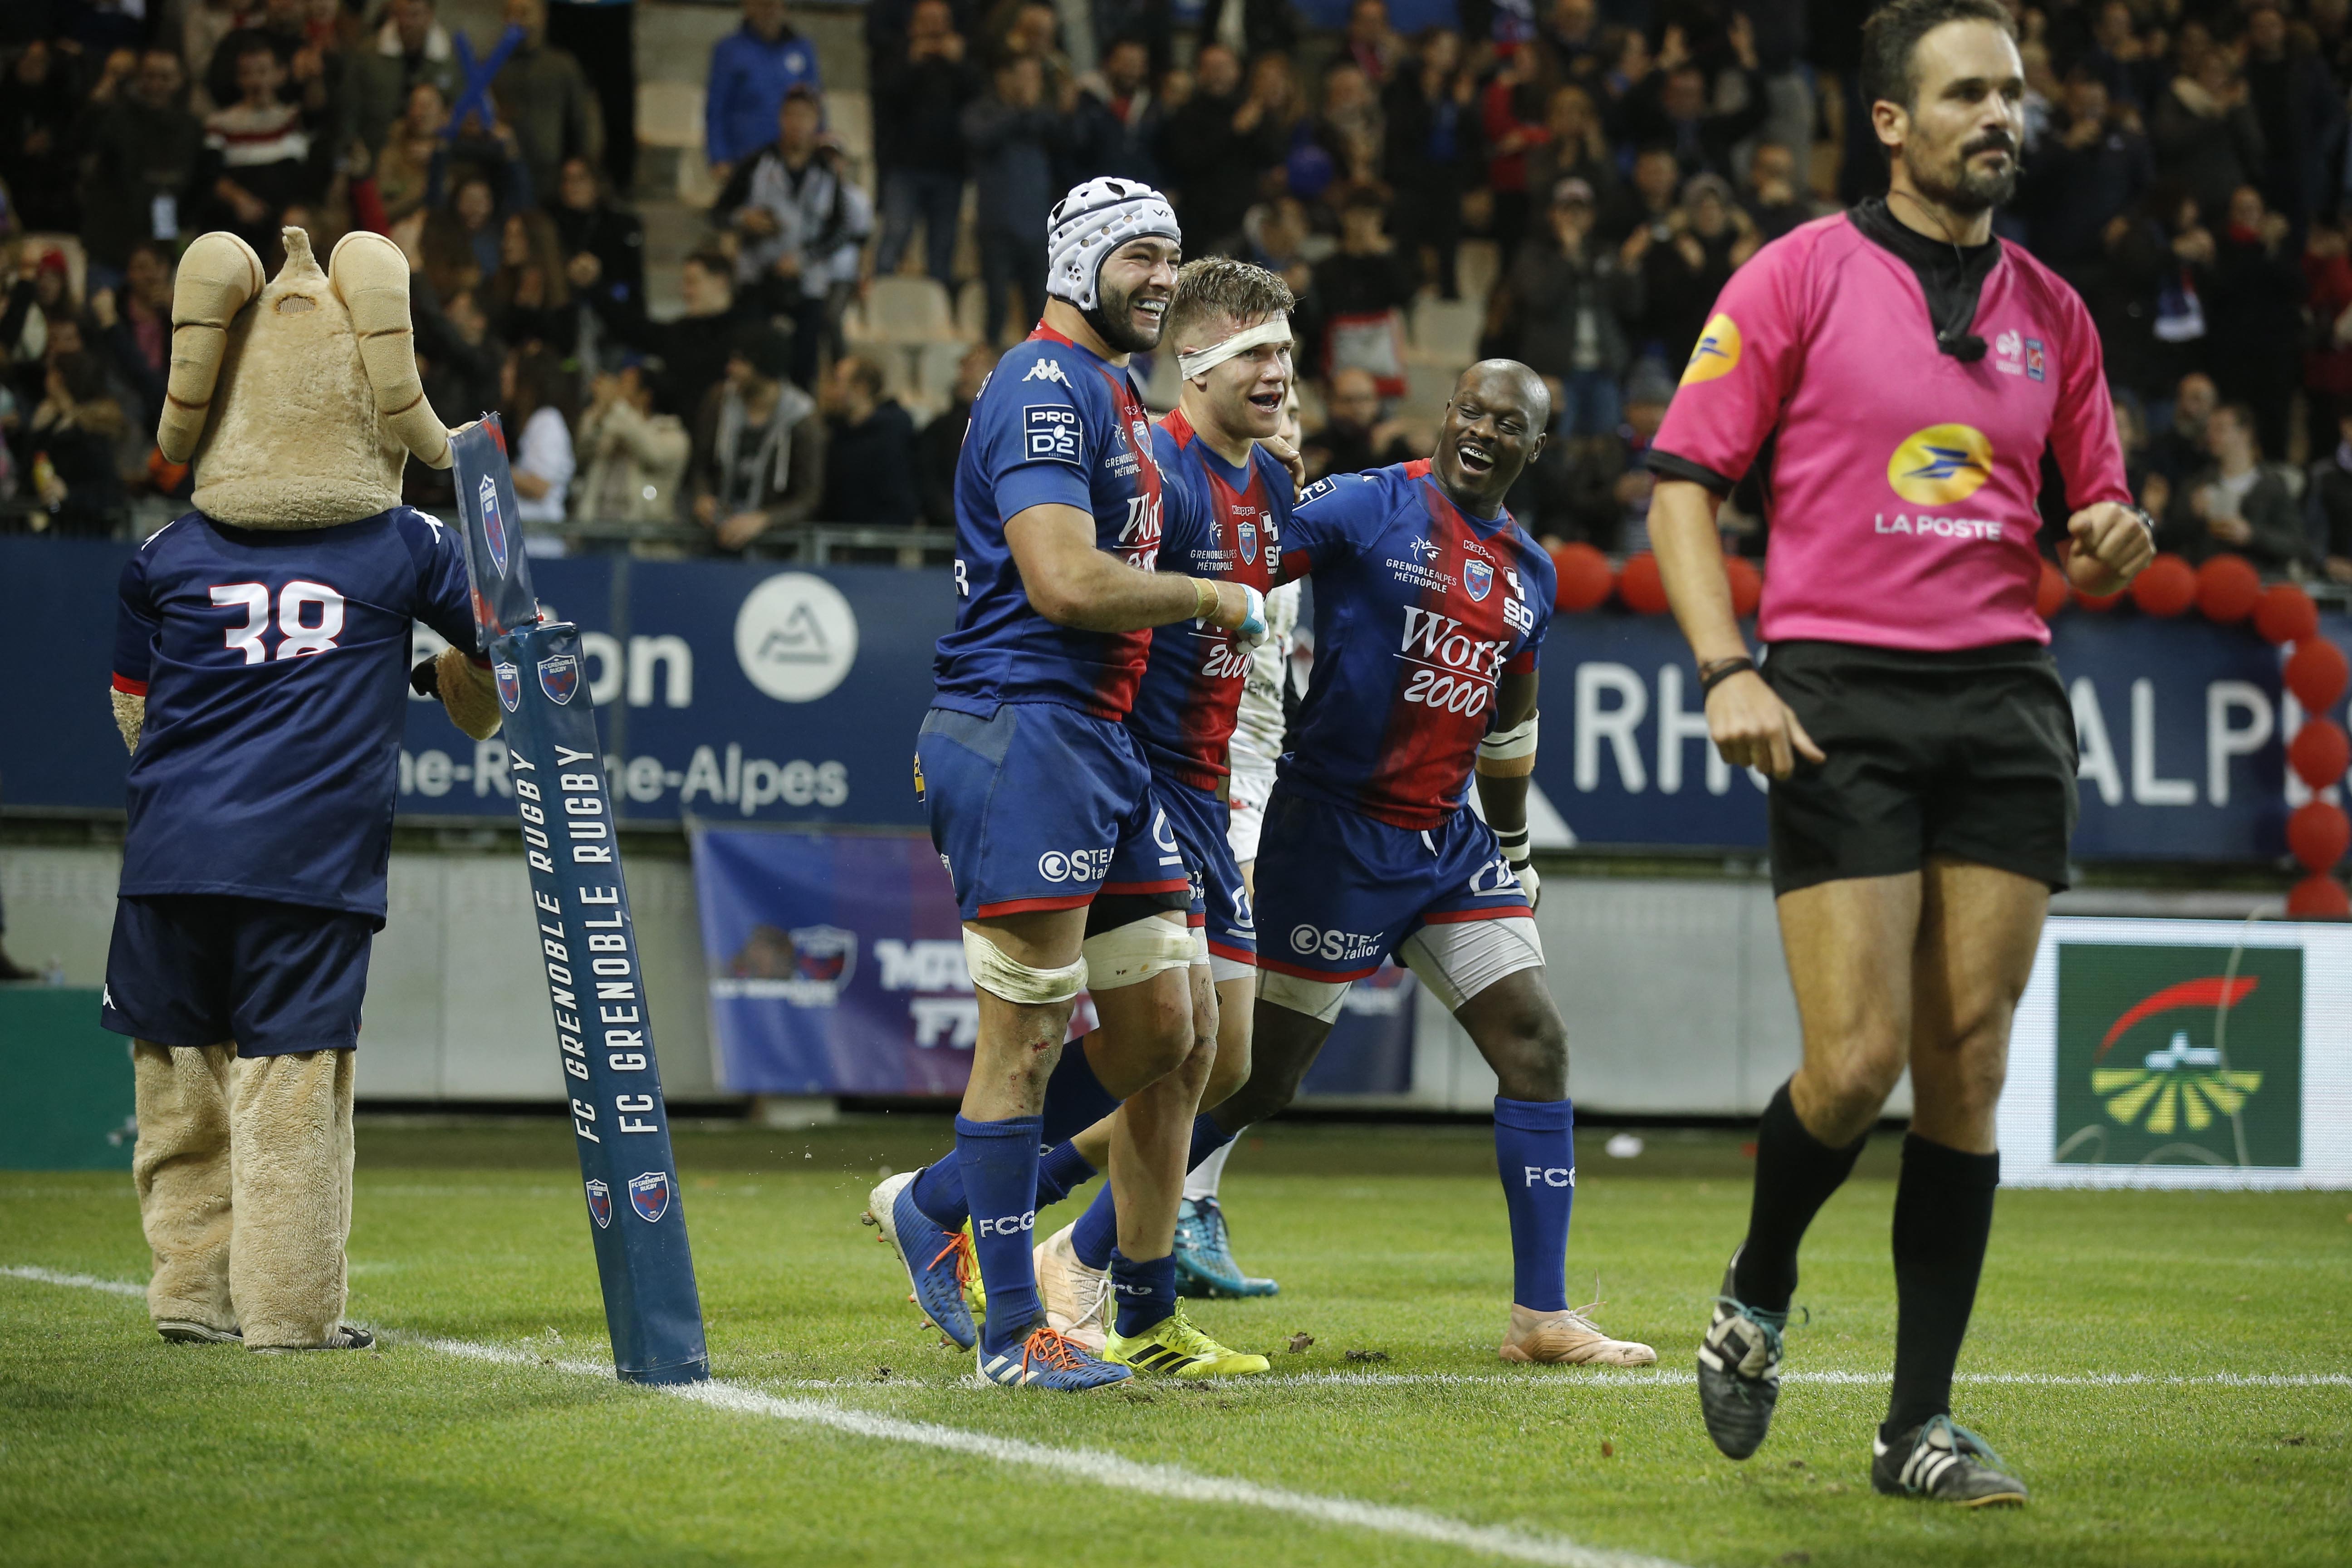 PRO D2 | FC GRENOBLE - OYONNAX RUGBY : 28-13